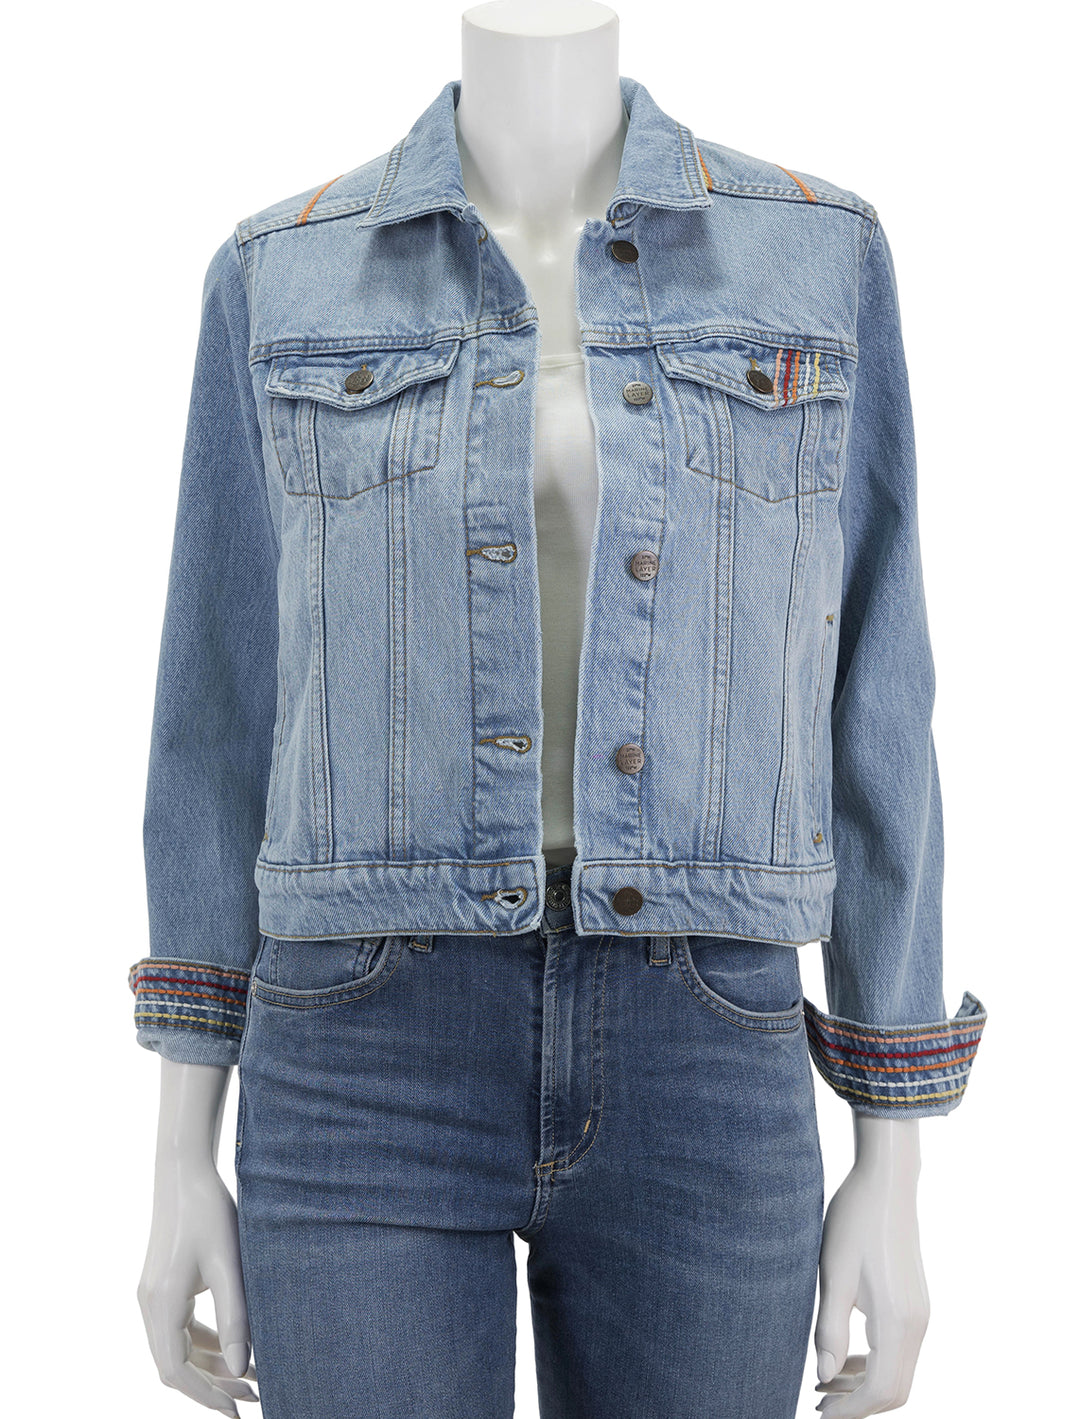 Front view of Marine Layer's embroidered denim jacket in light denim.